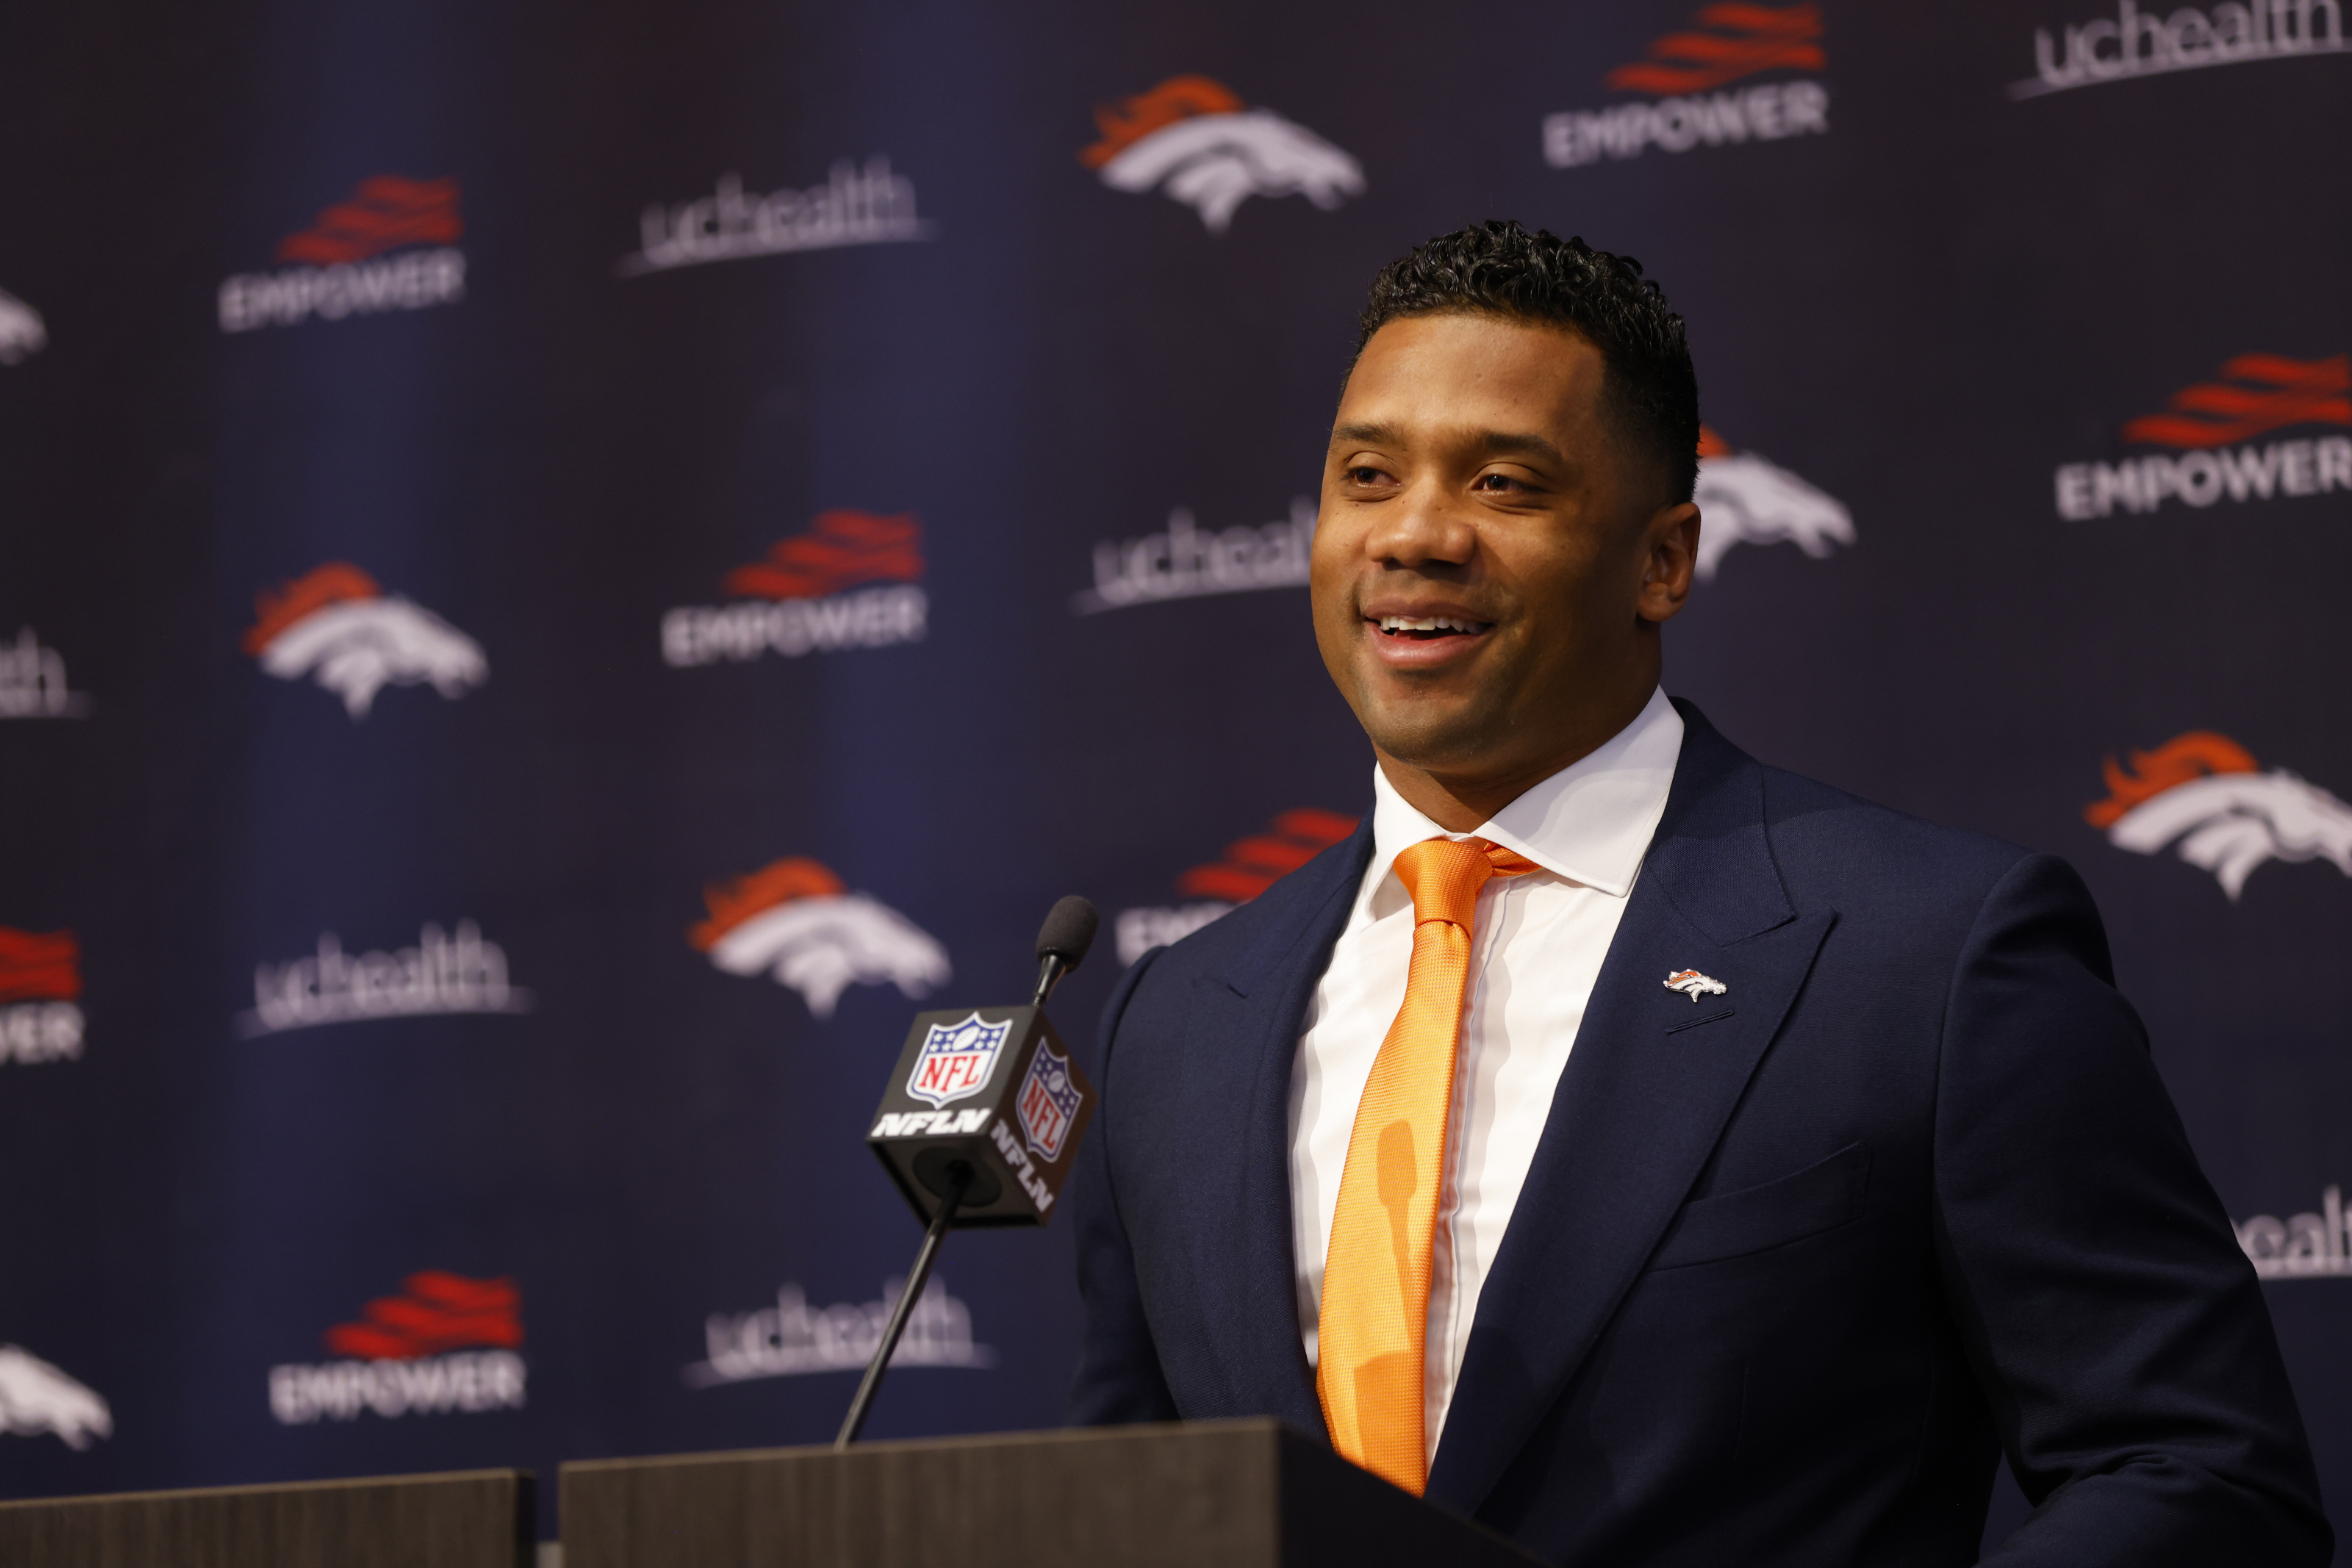 Mile High Morning: Peyton Manning, Russell Wilson suit up in